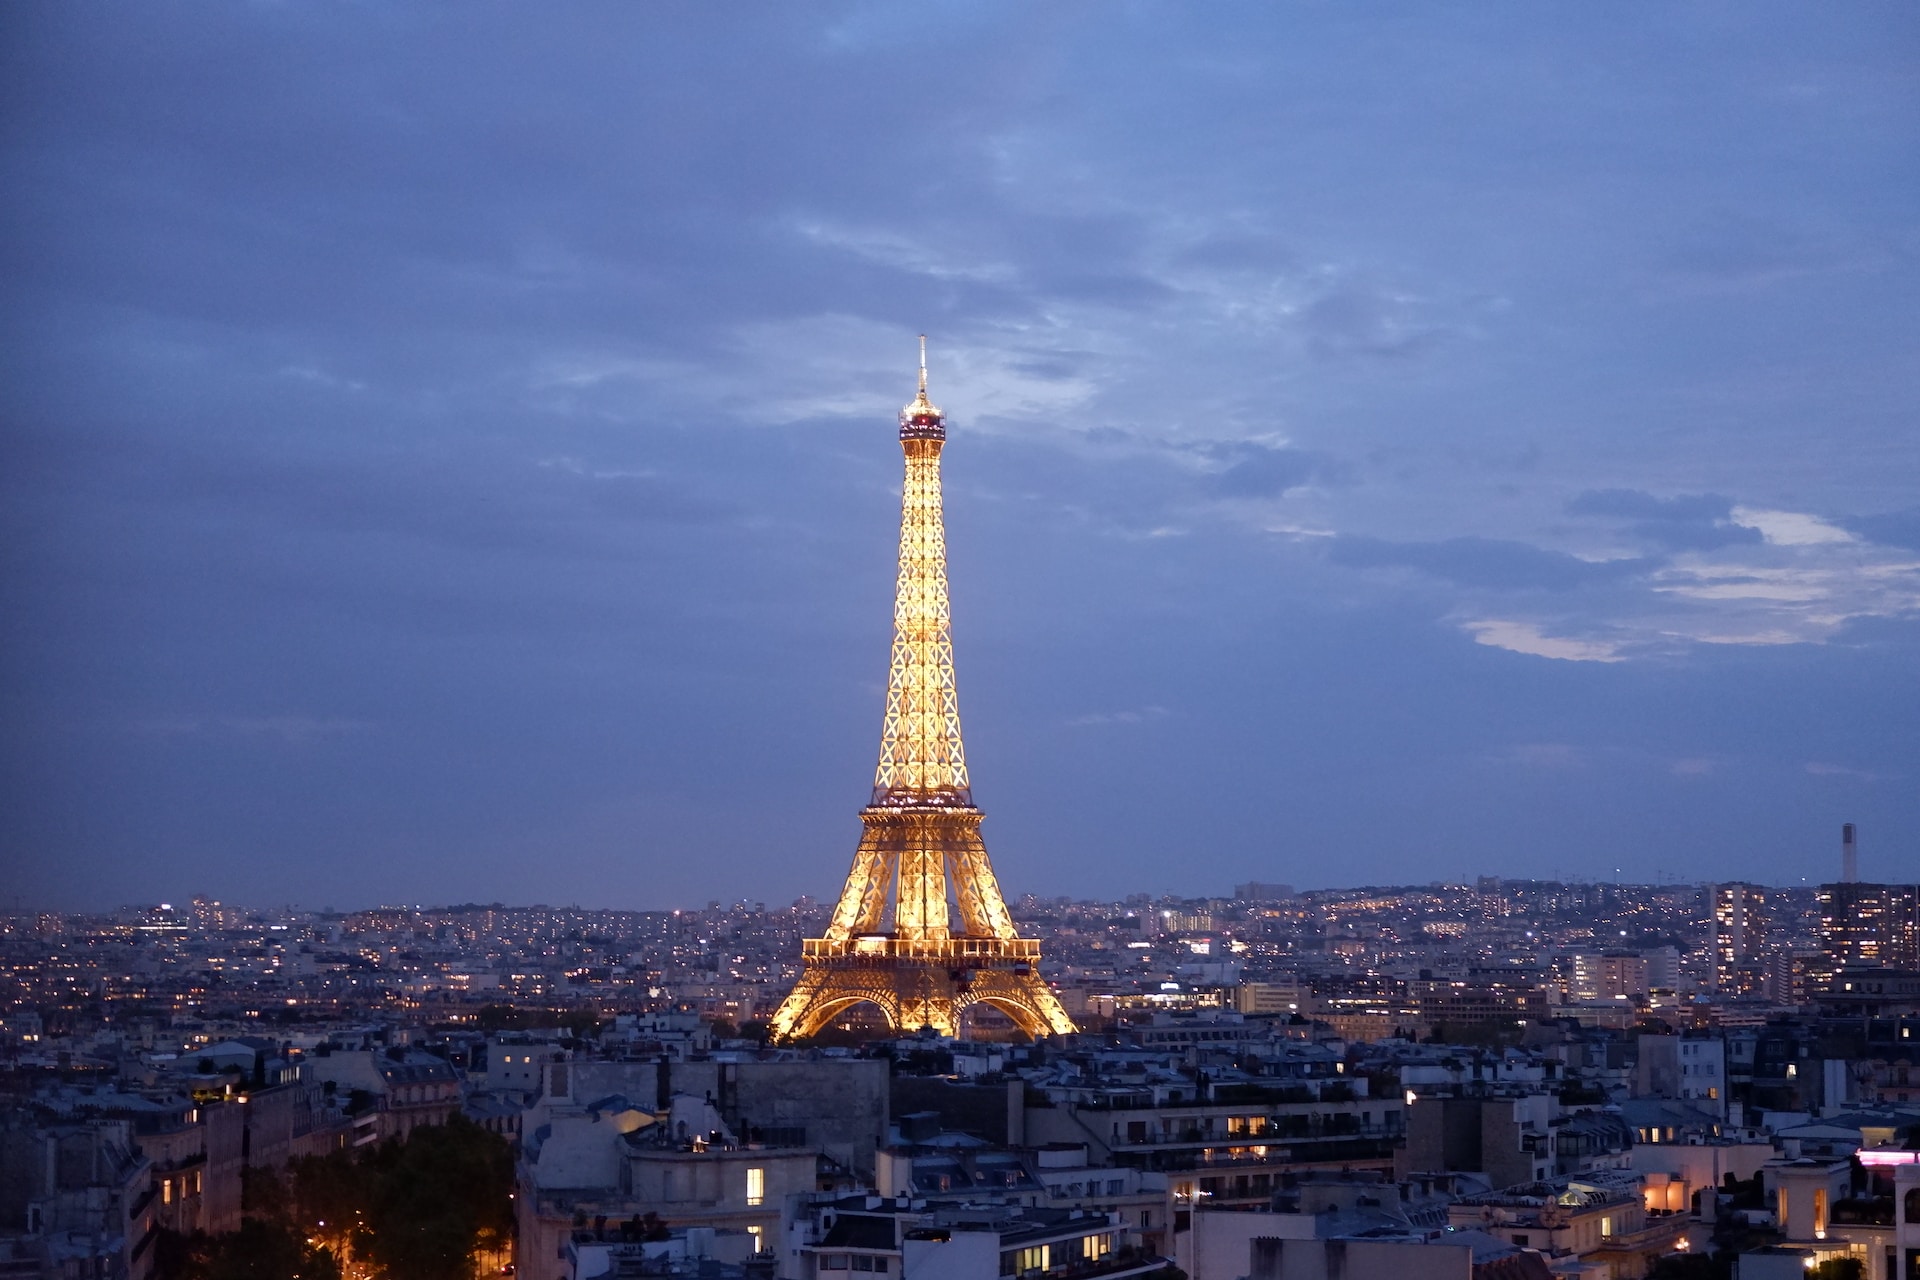 The mighty Eiffel Tower gleaming bright in the night sky in Paris, a thing of beauty to behold. 